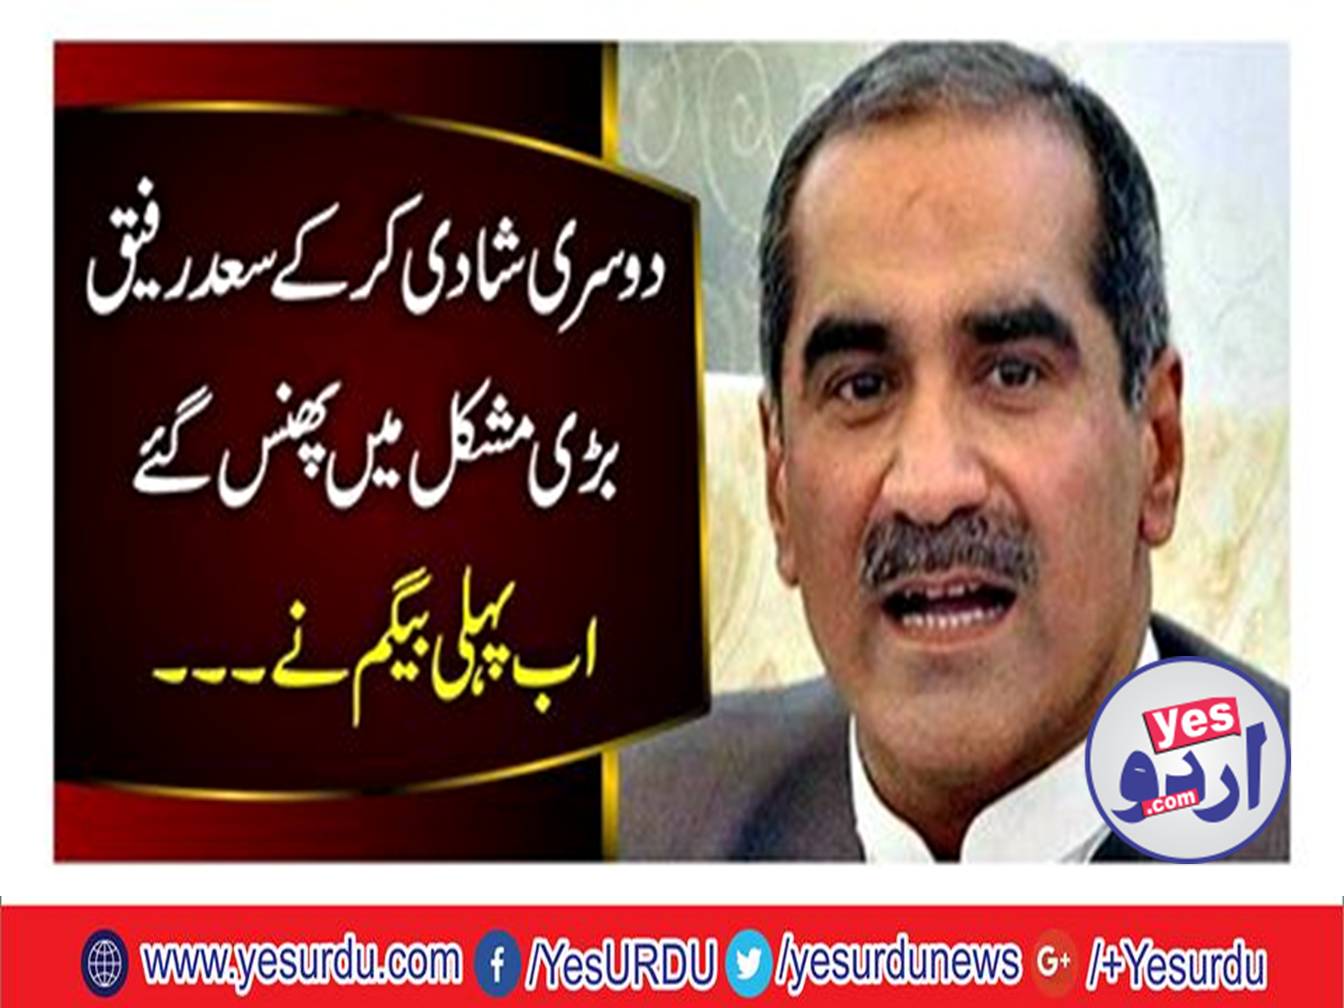 Saad Rafiq's second marriage, the first wife angry, returning the nomination papers